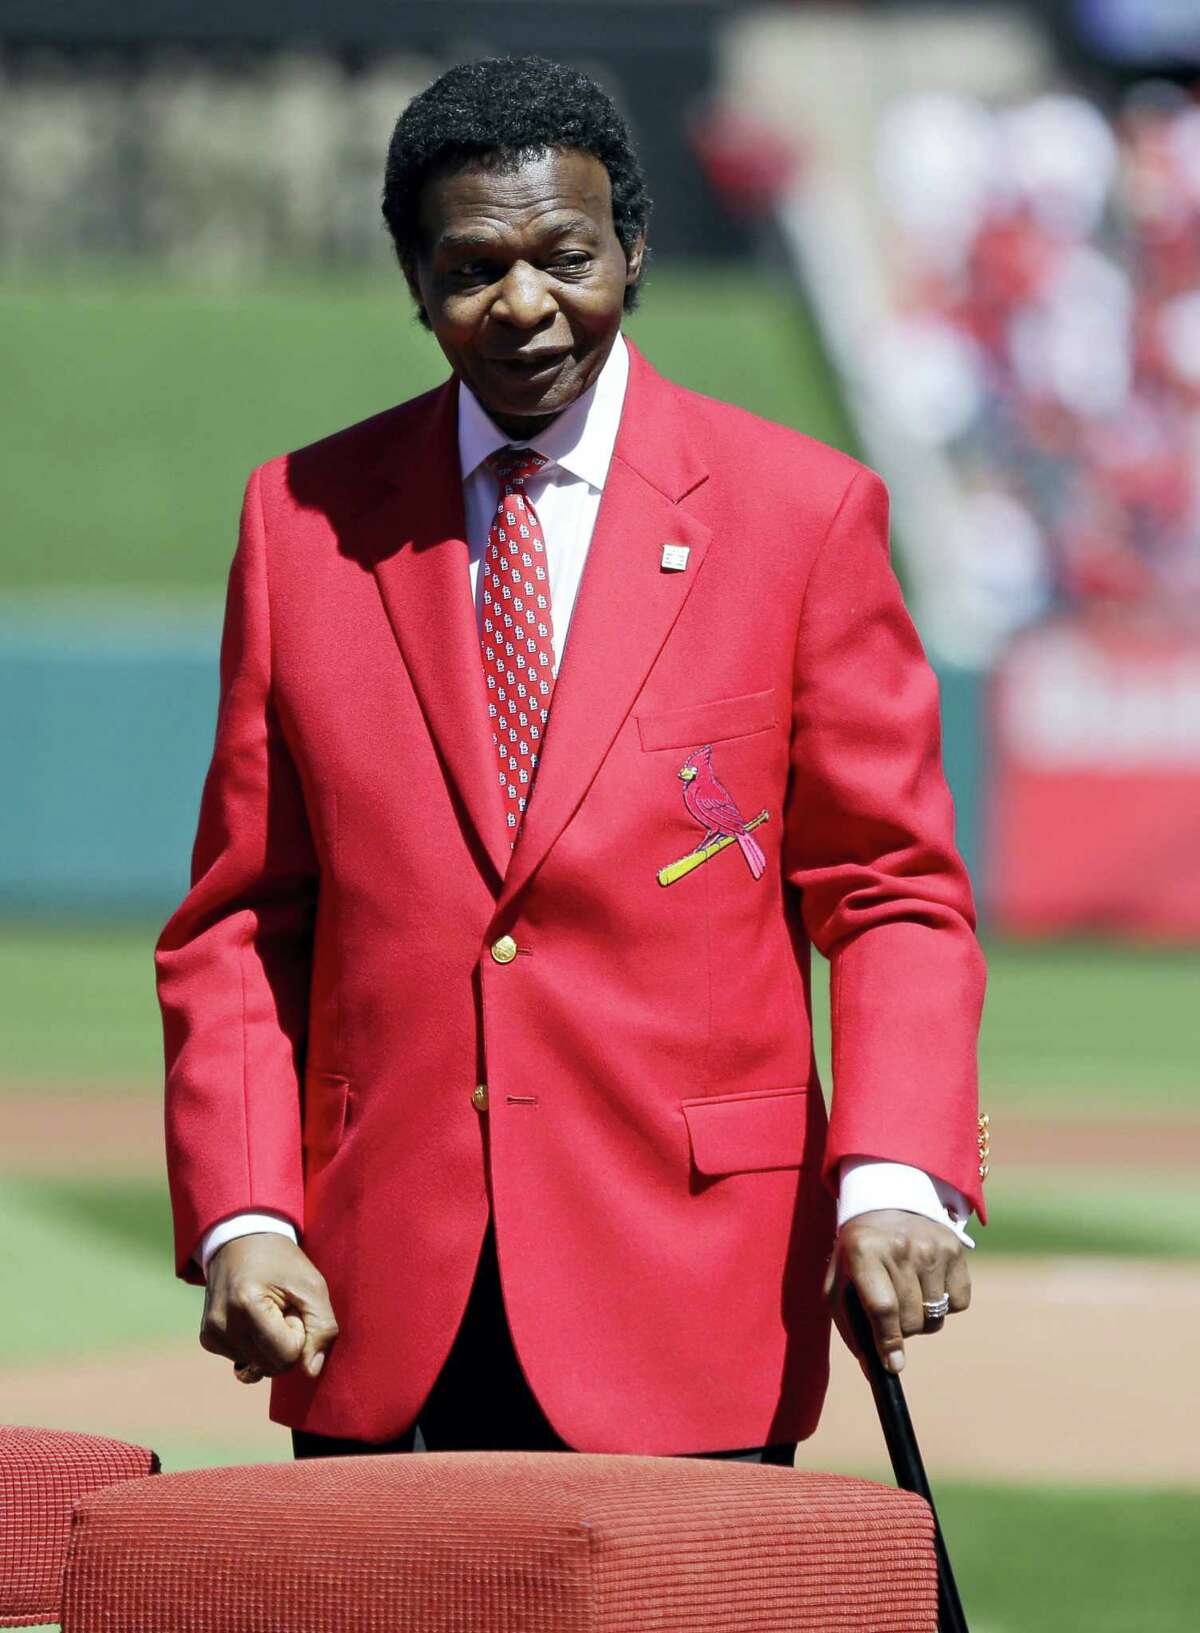 Former St. Louis Cardinals great Lou Brock was recently diagnosed with bone cancer and will miss a scheduled upcoming appearance at Bush Stadium.